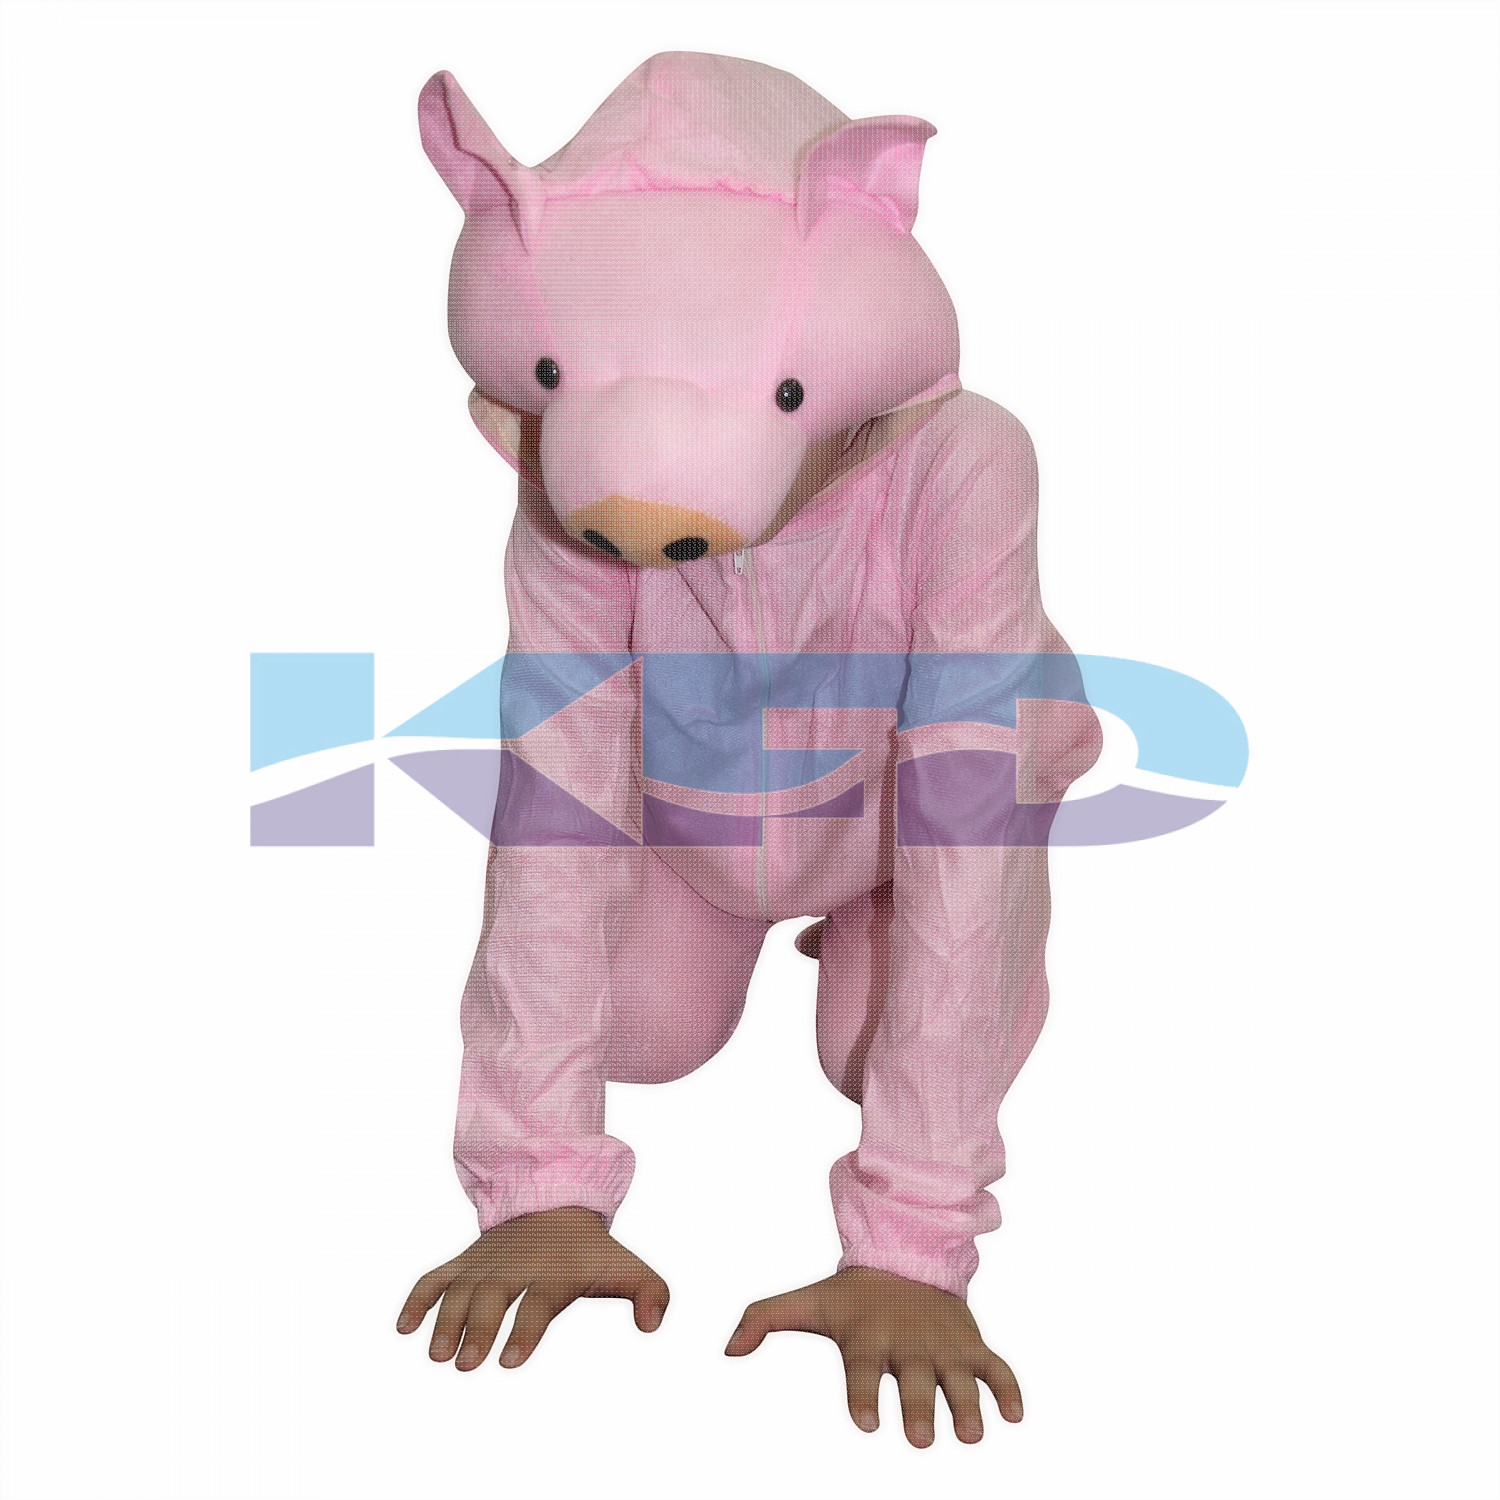 Pink Pig fancy dress for kids,Farm Animal Costume for School Annual function/Theme Party/Competition/Stage Shows Dress